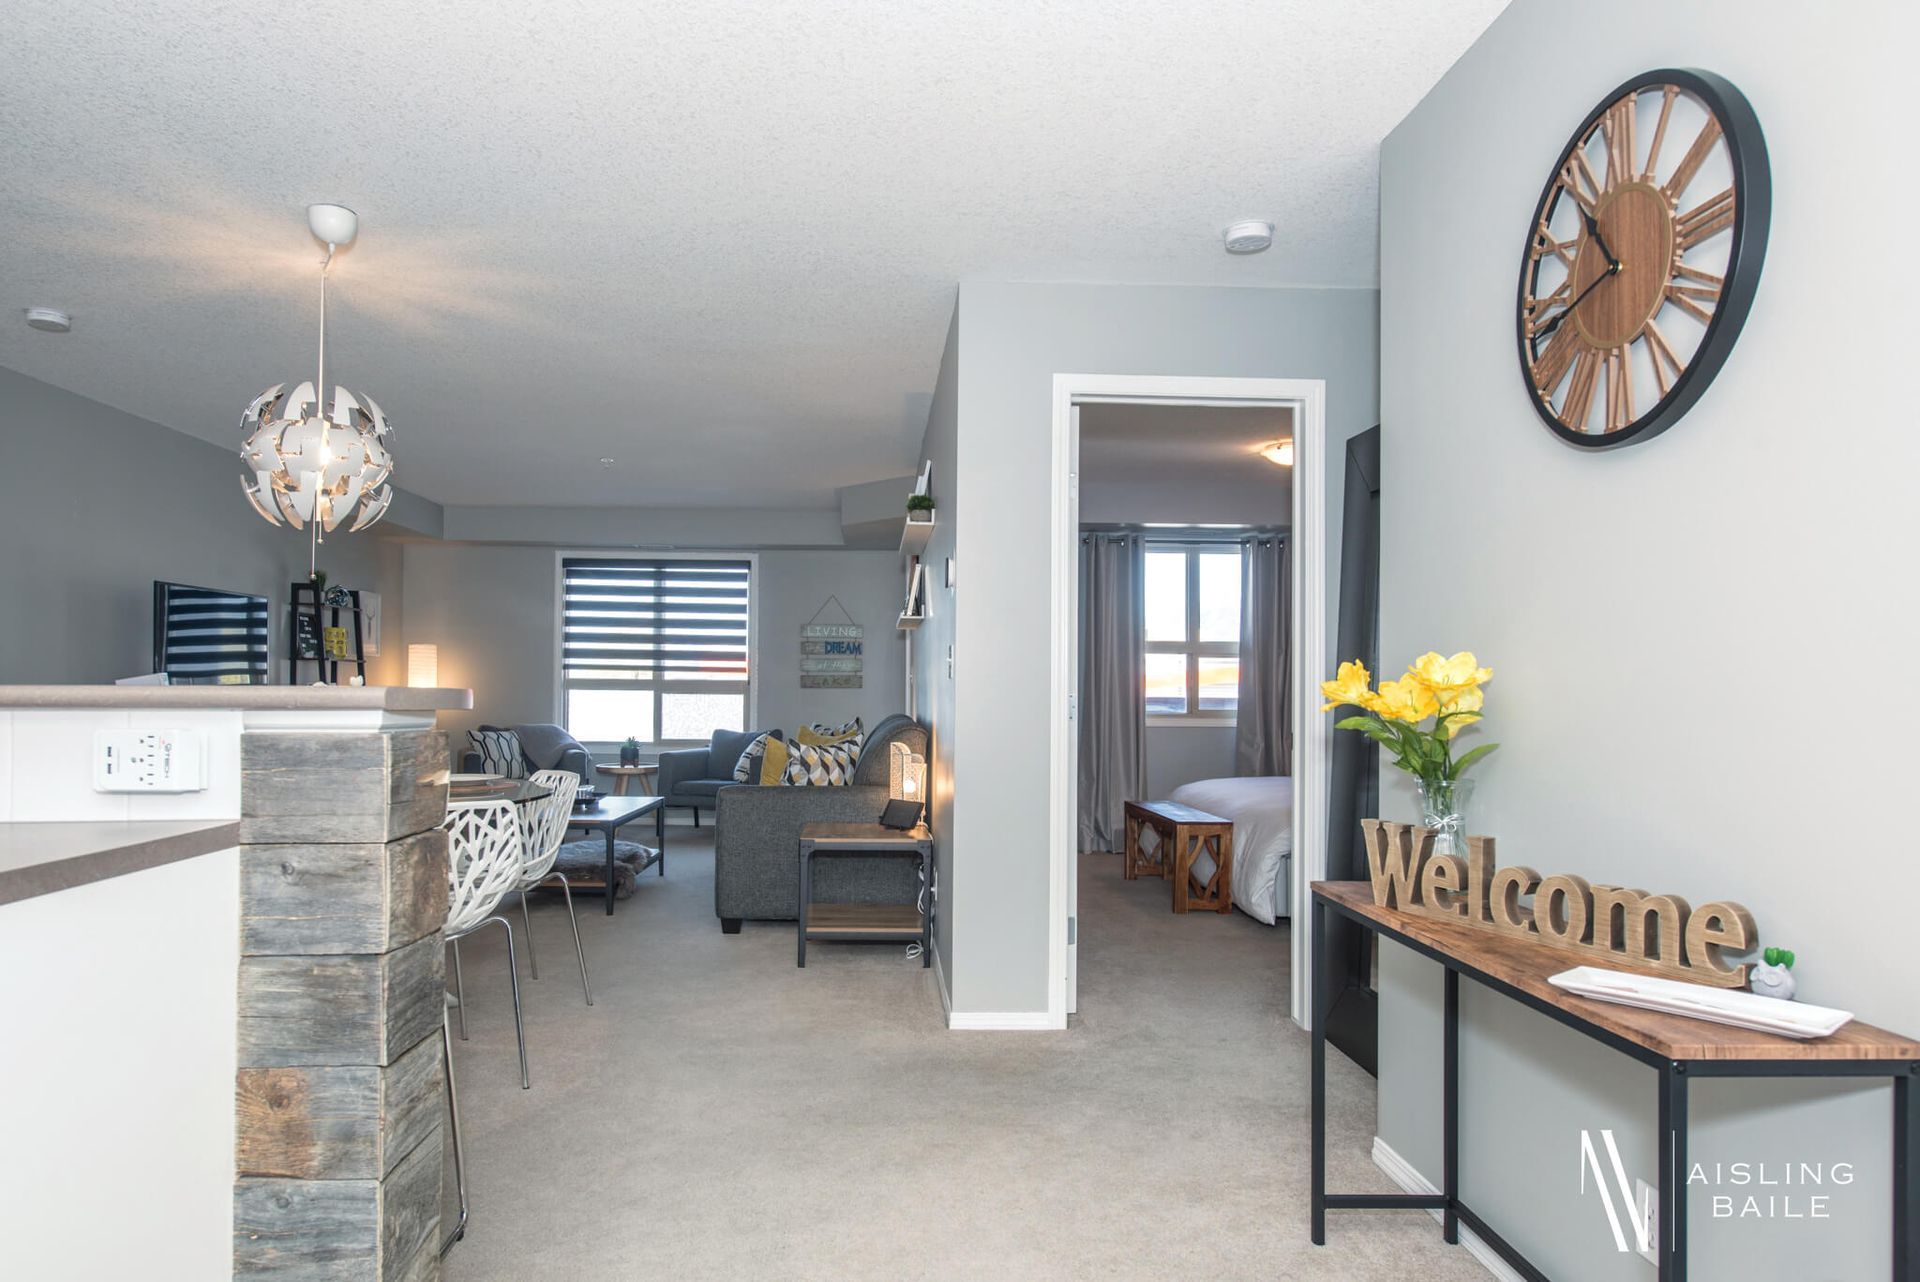 Entranceway to the Trendy condo at Lake Windermere Pointe in Invermere, a BC Vacation Rental hosted by Aisling Baile Property Management.